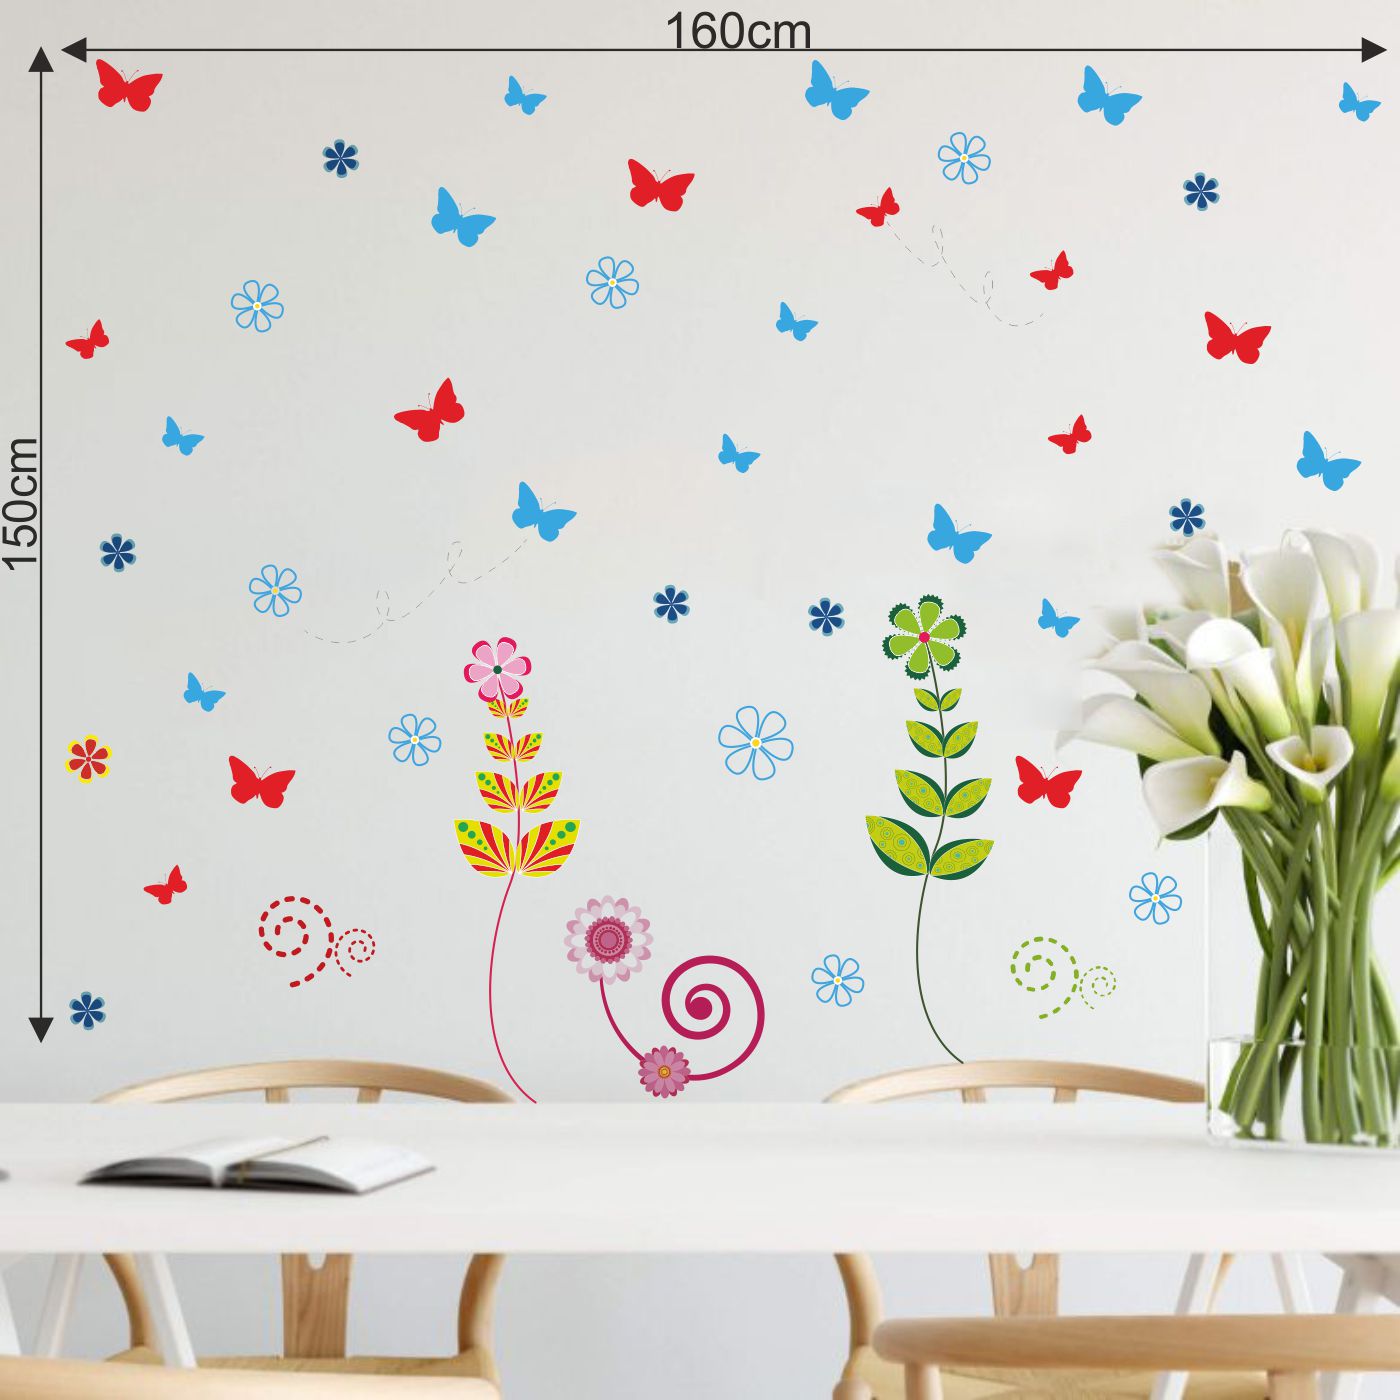 ORKA Butterfly Theme Wall Decal Sticker 22  